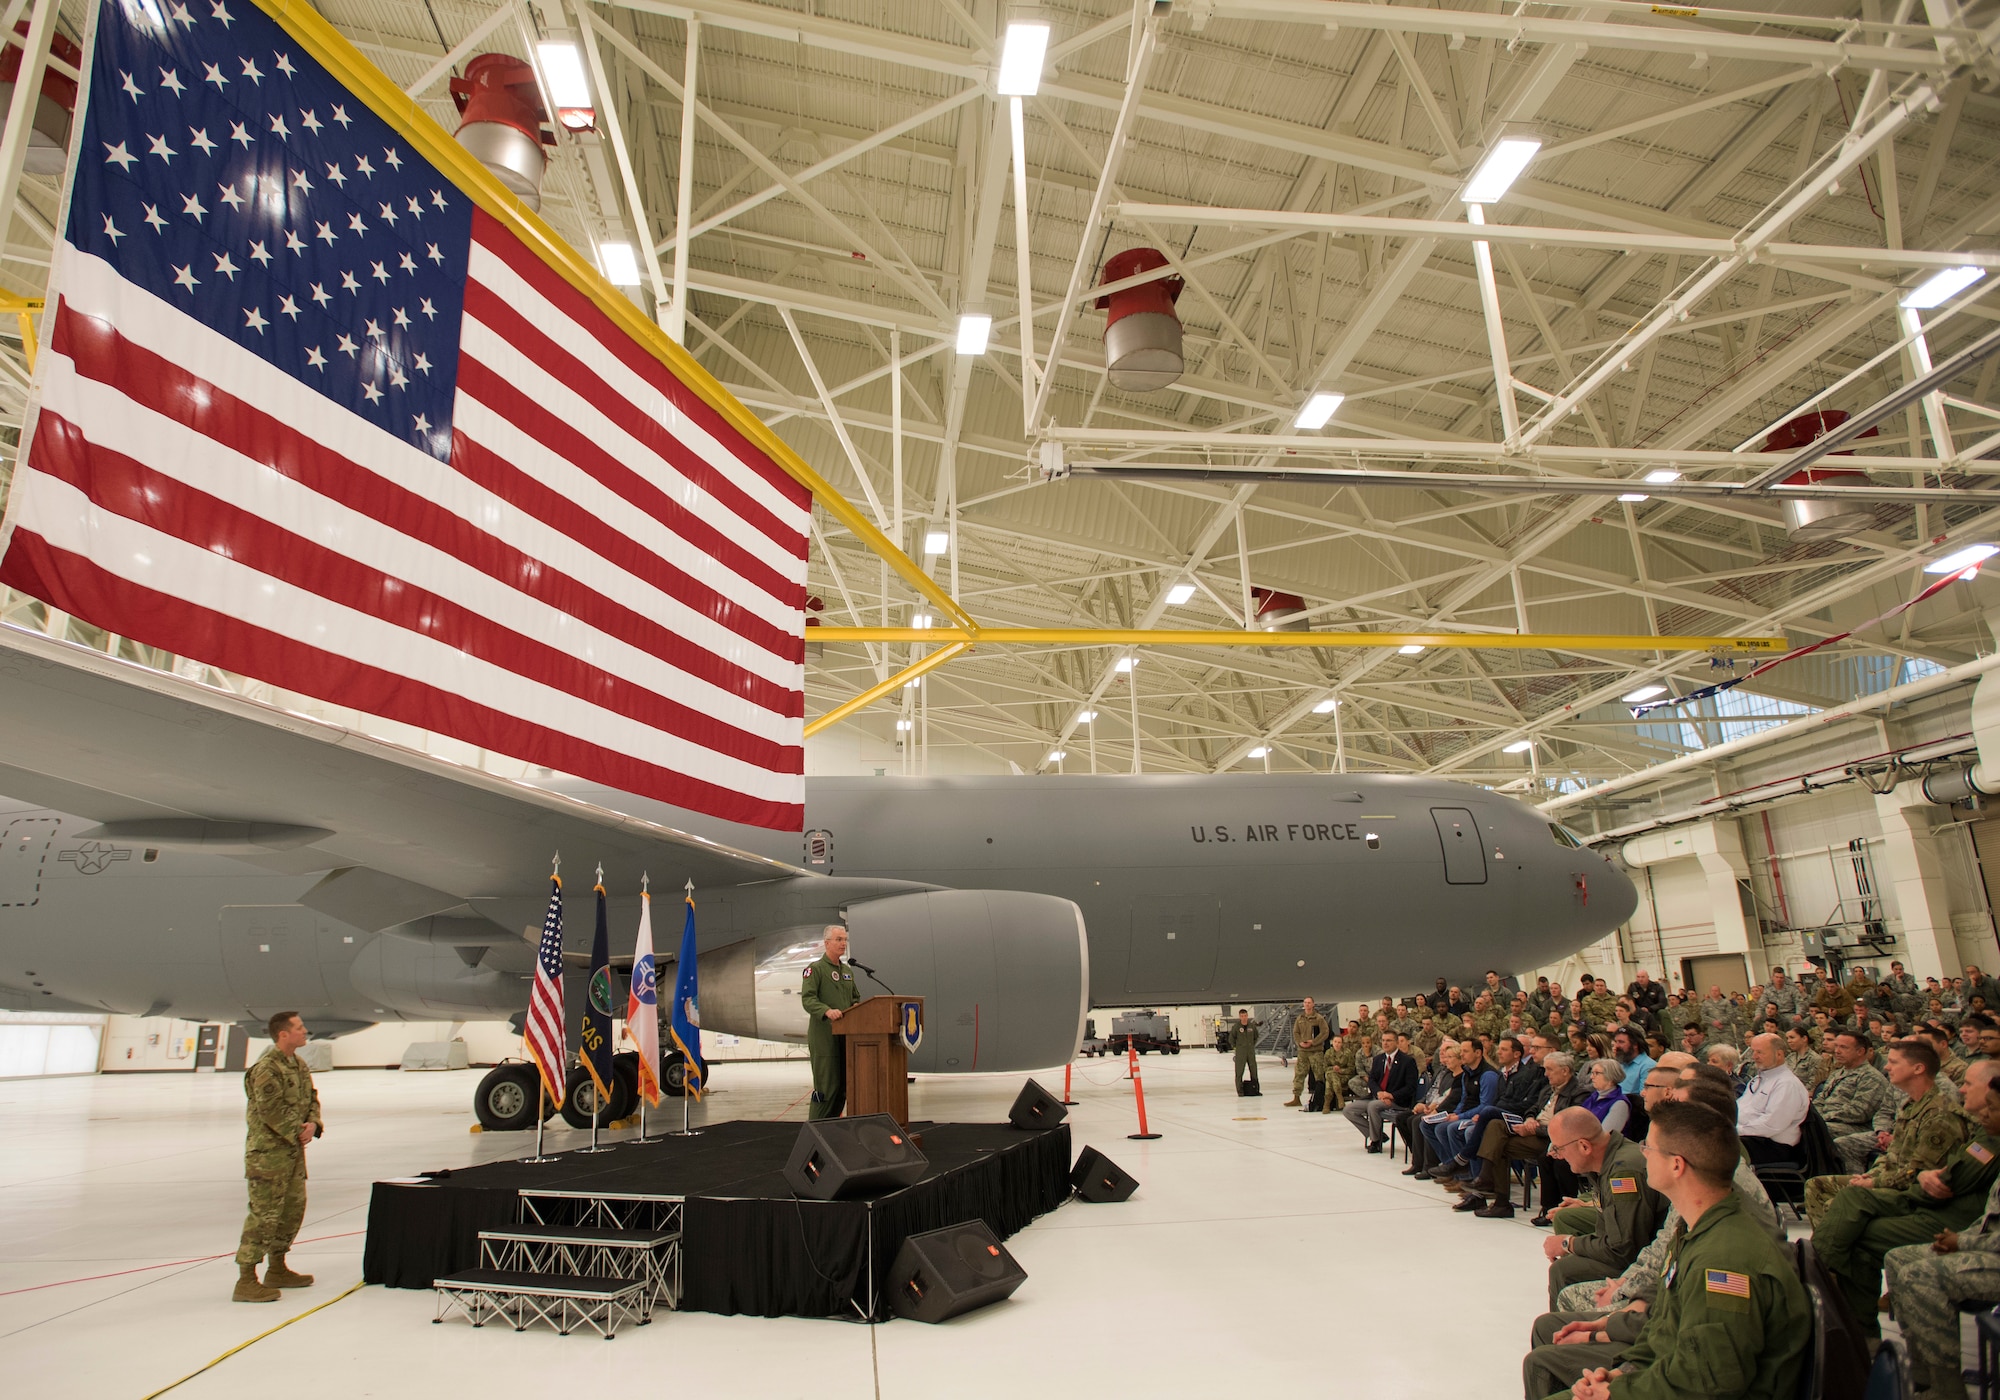 Gen. Paul J. Selva, 10th Vice Chairman of the Joint Chiefs of Staff, speaks to Airmen at McConnell Air Force Base, Kan., Jan. 31, 2019, during a welcoming ceremony for the delivery of the third and fourth KC-46A Pegasus aircraft. McConnell is expected to receive 18 new KC-46s during the initial allocation to the Air Force. (U.S. Air Force photo by Staff Sgt. David Bernal Del Agua)